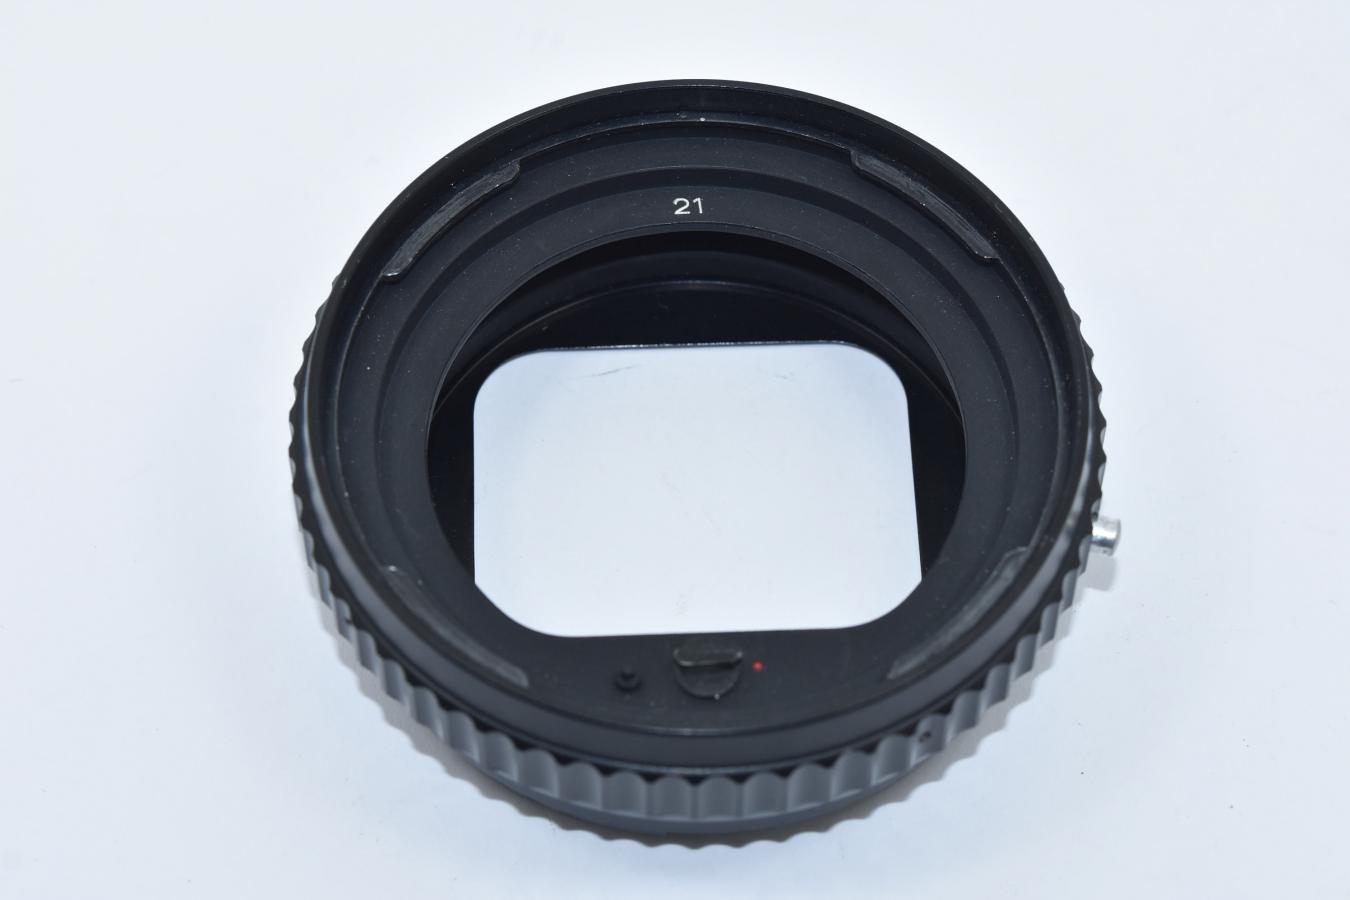 HASSELBLAD EXTENSION TUBE 21